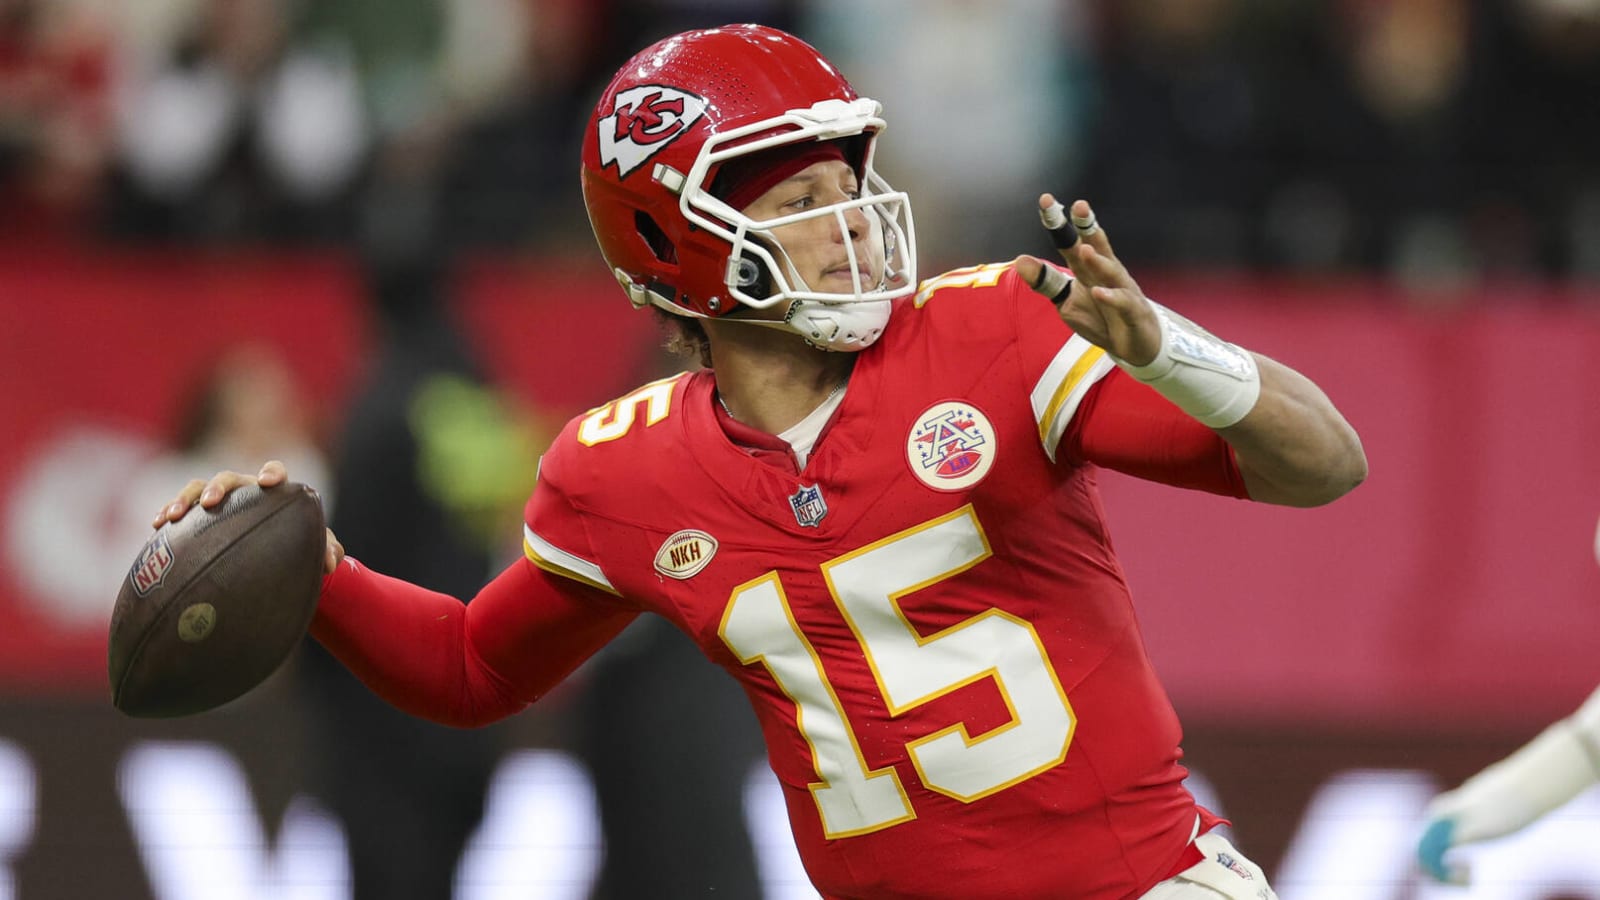 Patrick Mahomes’ injury status suddenly changes in Week 11